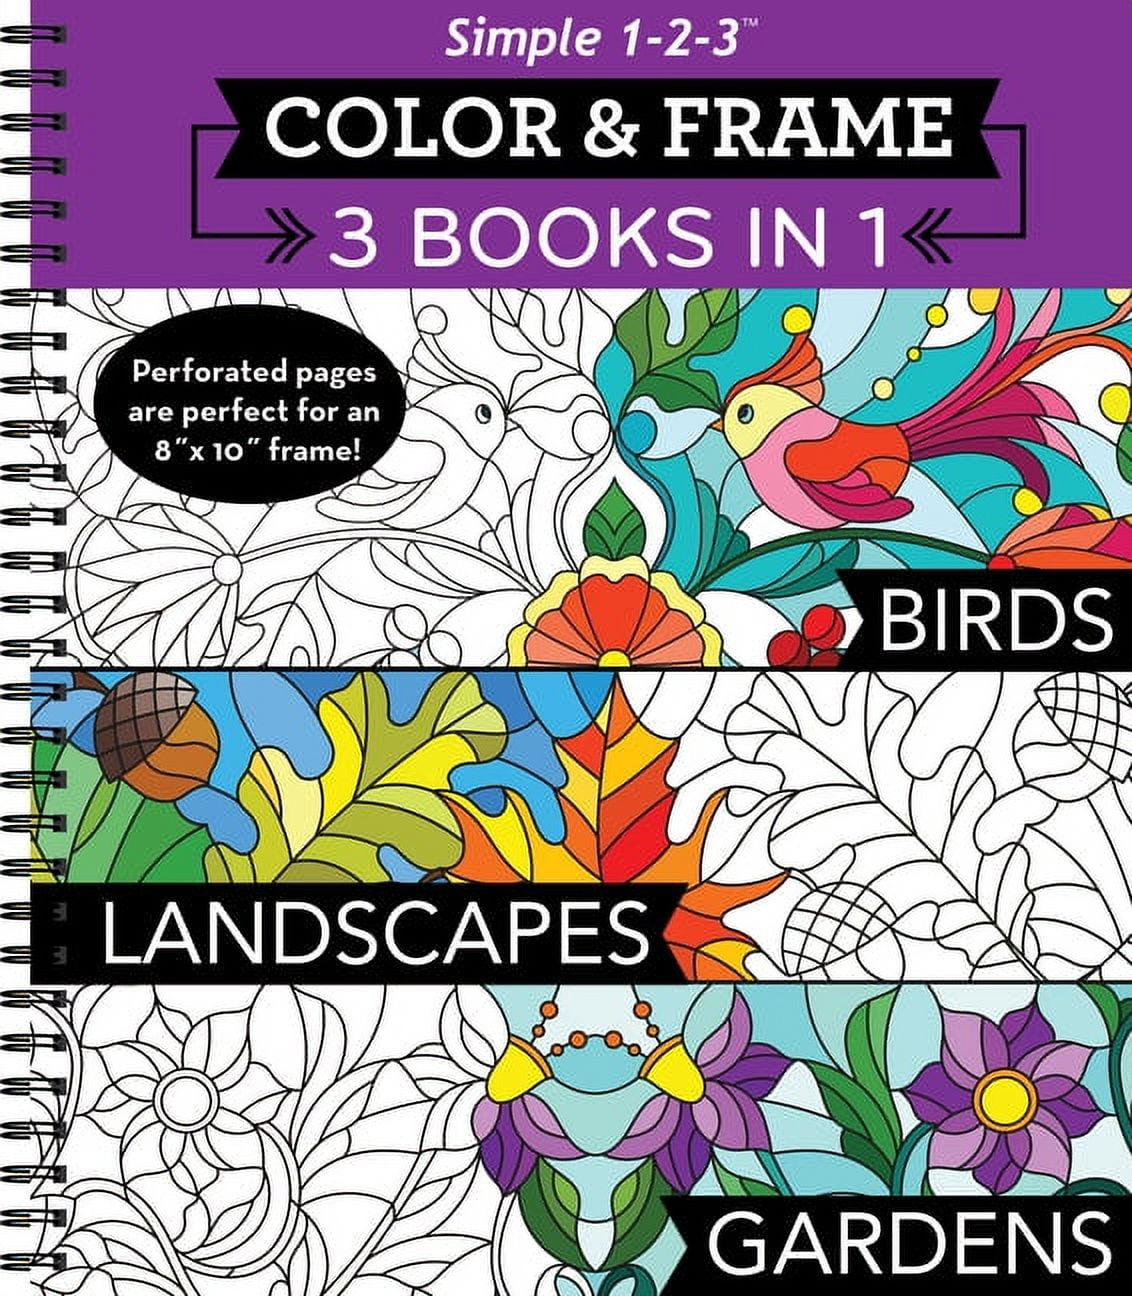 Color & Frame - 3 Books in 1 - Flowers, Deserts, Oceans (Adult Coloring Book)  (Spiral)